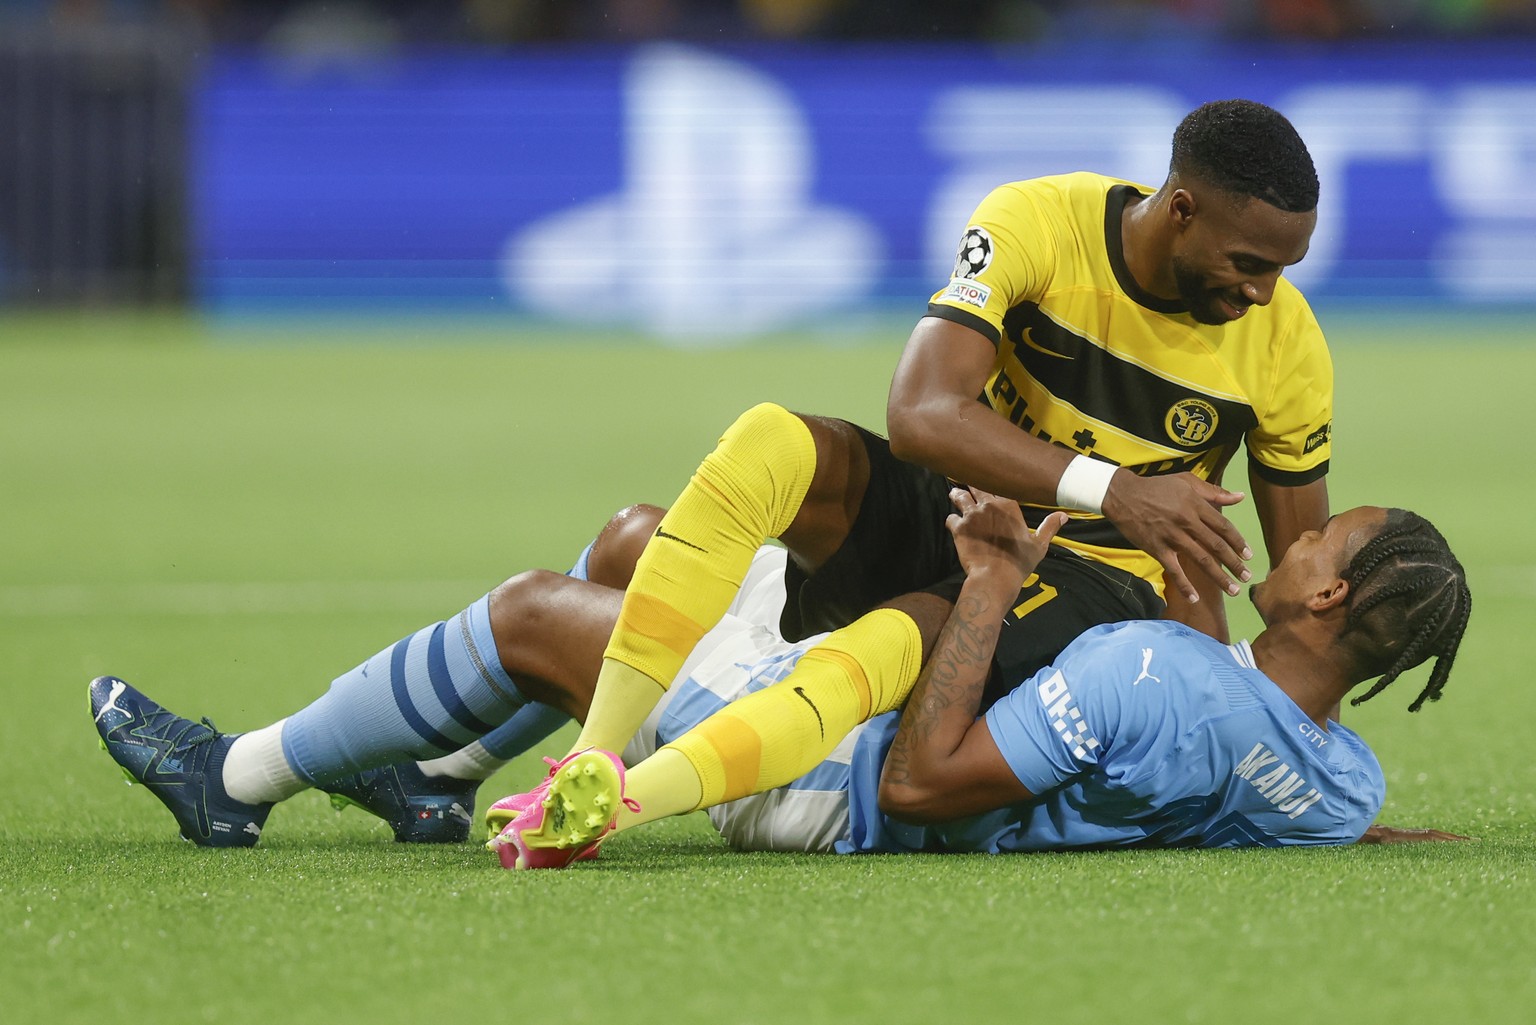 YB&#039;s Ulisses Garcia, left, and Manchester City&#039;s Manuel Akanji react as they both fall, during the UEFA Champions League group G soccer match between Switzerland&#039;s BSC Young Boys and En ...